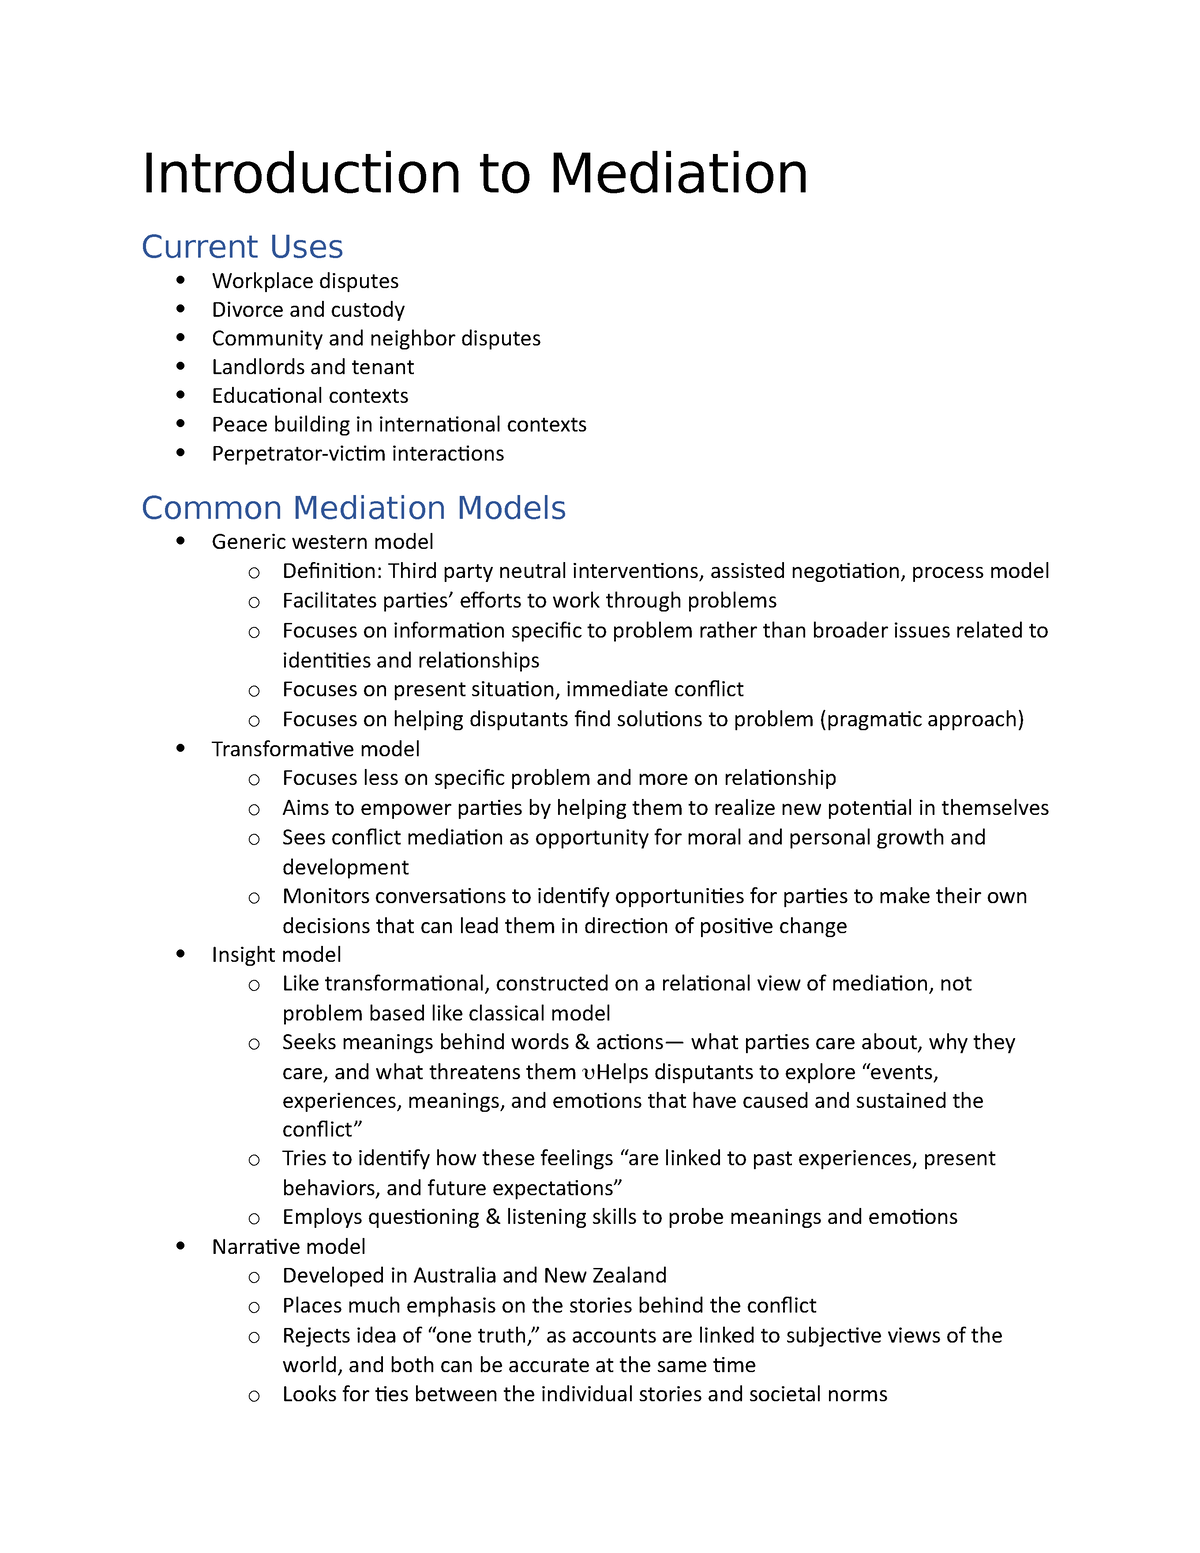 essay what is mediation